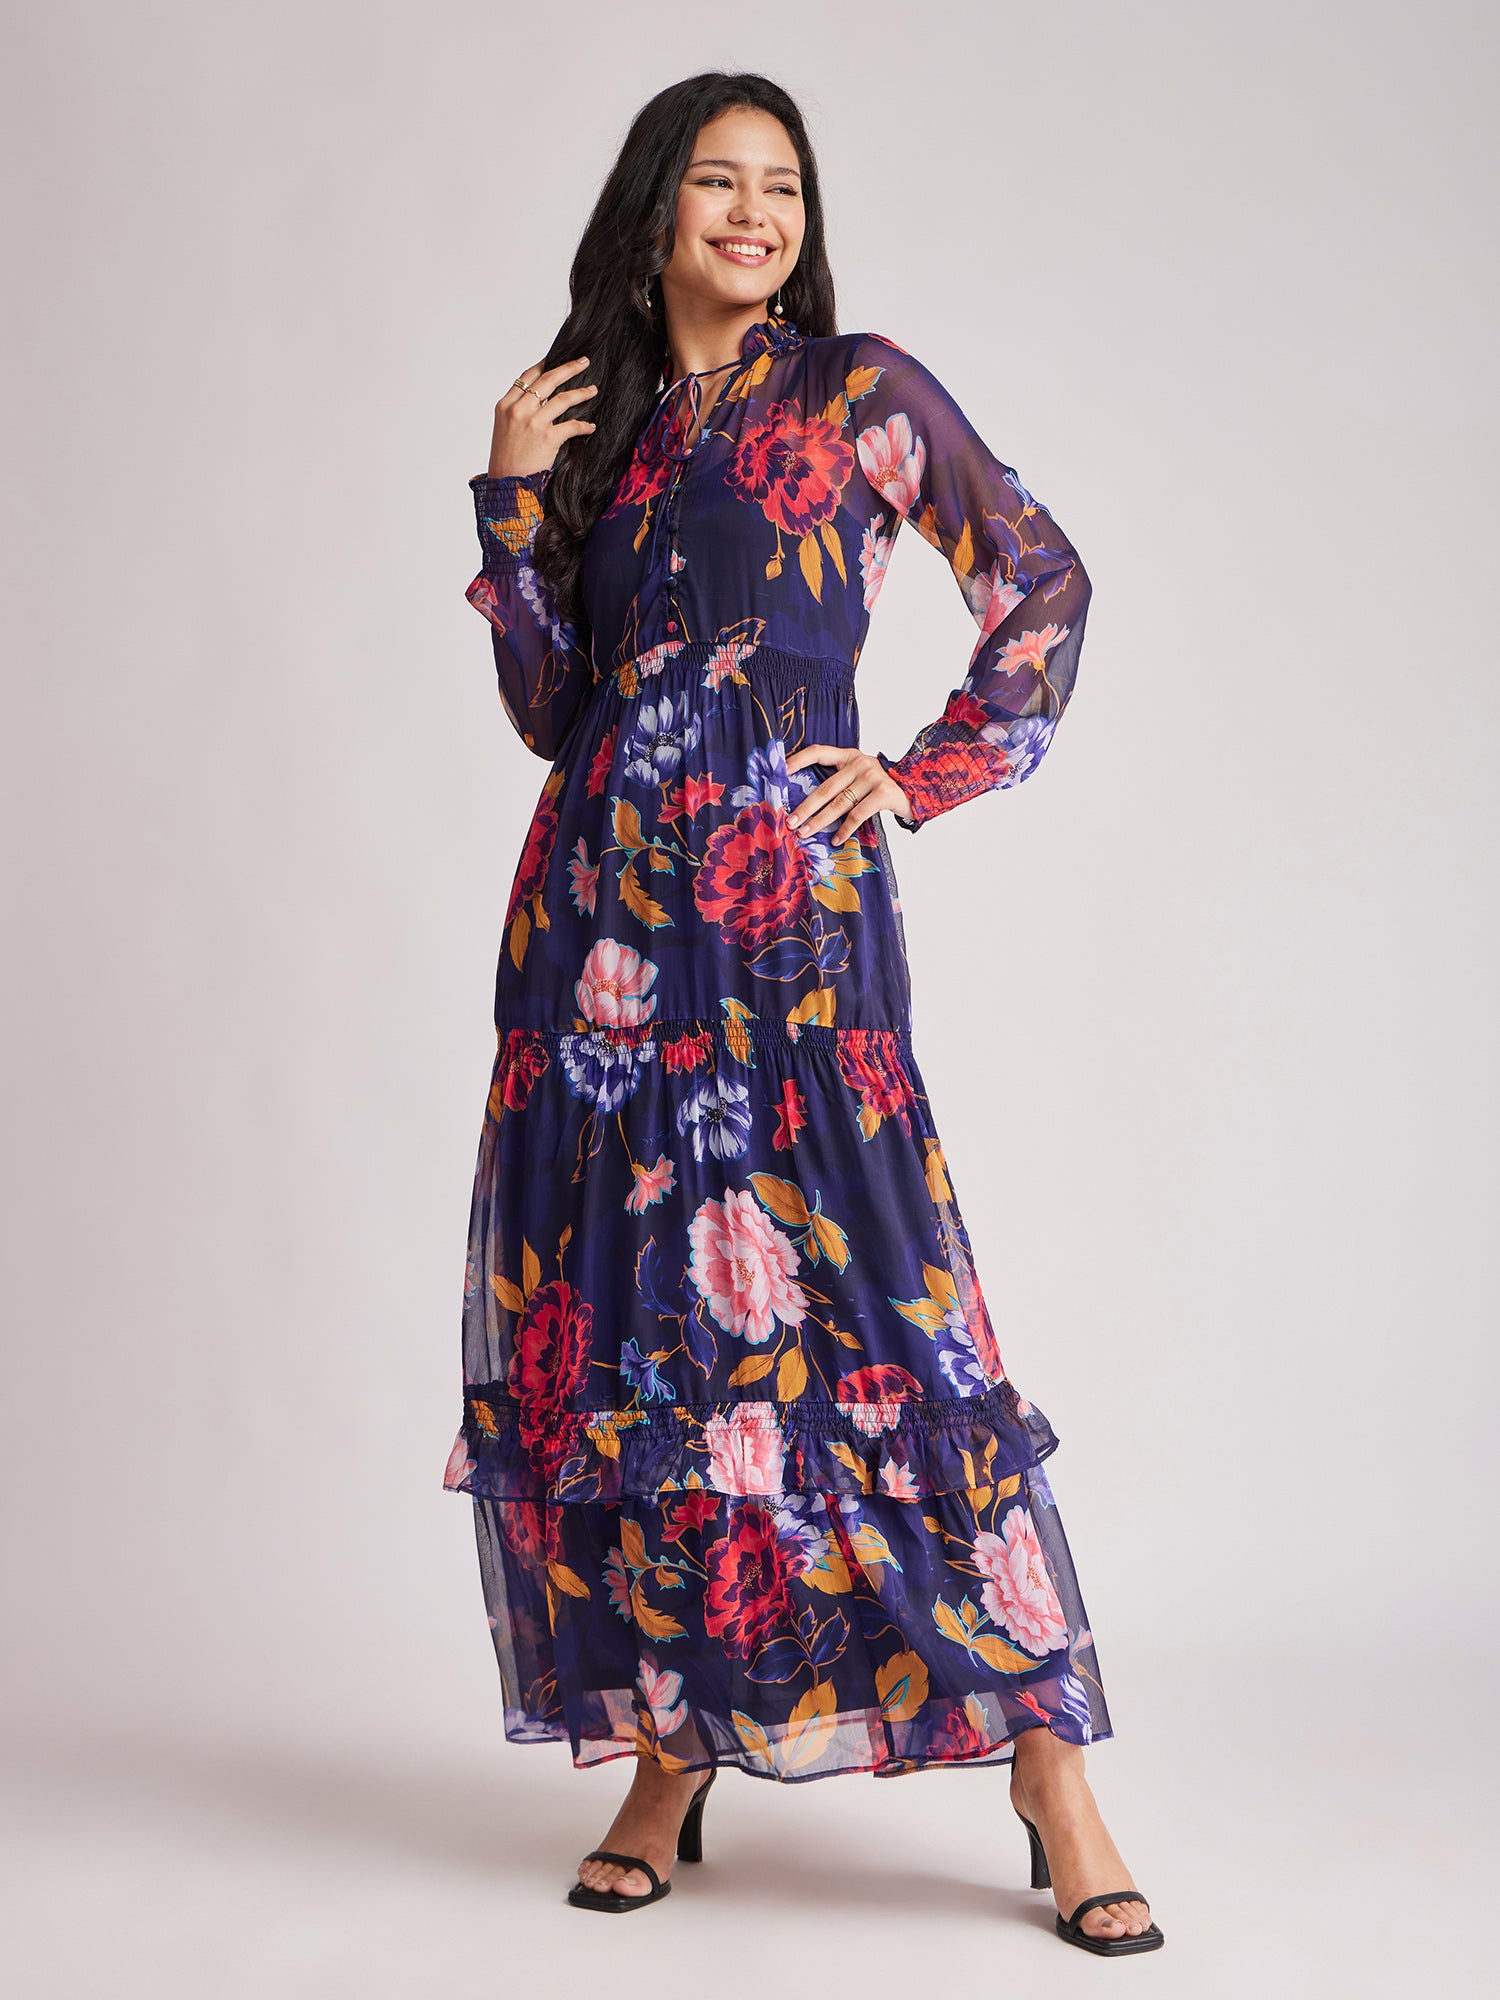 Floral Ruffle Dress - Navy Blue And Multicolour